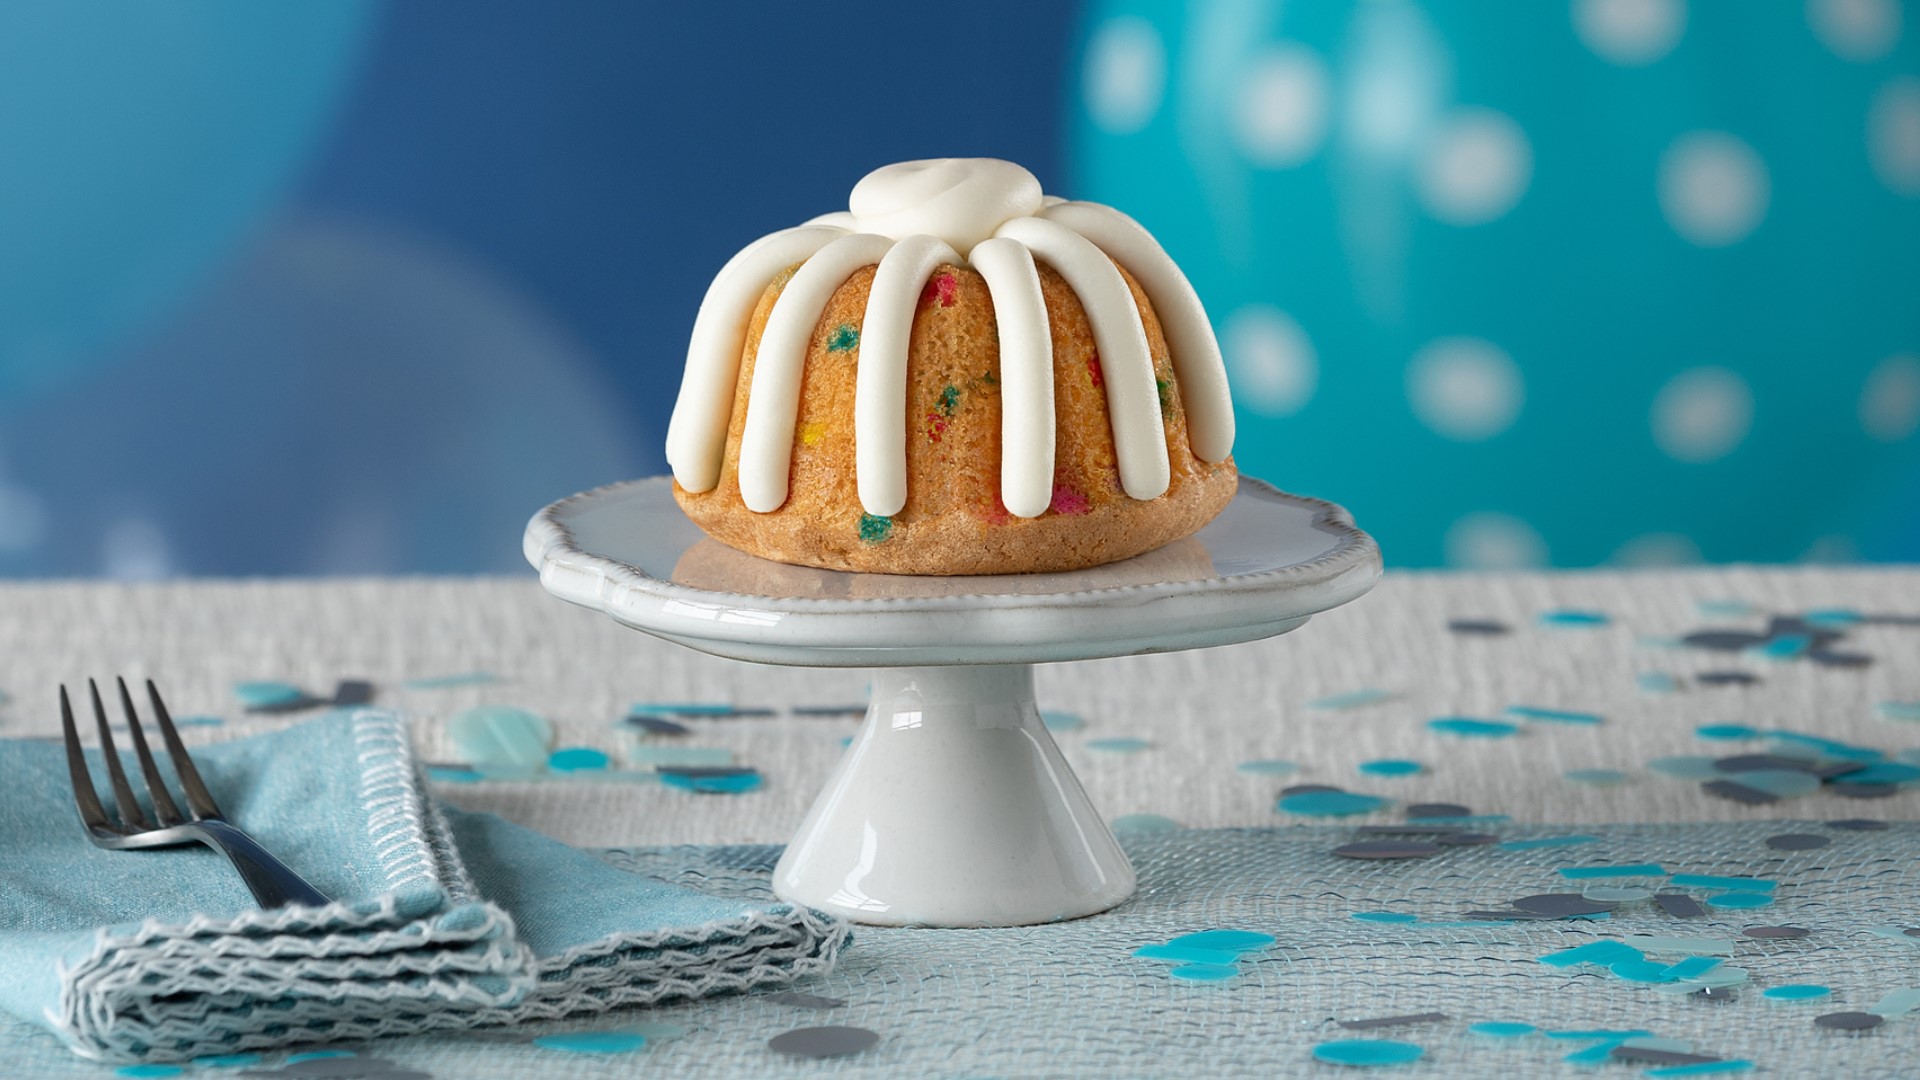 On Thursday, Sept. 1, the bakery will give the first 250 guests at each location a free Confetti Bundtlet.